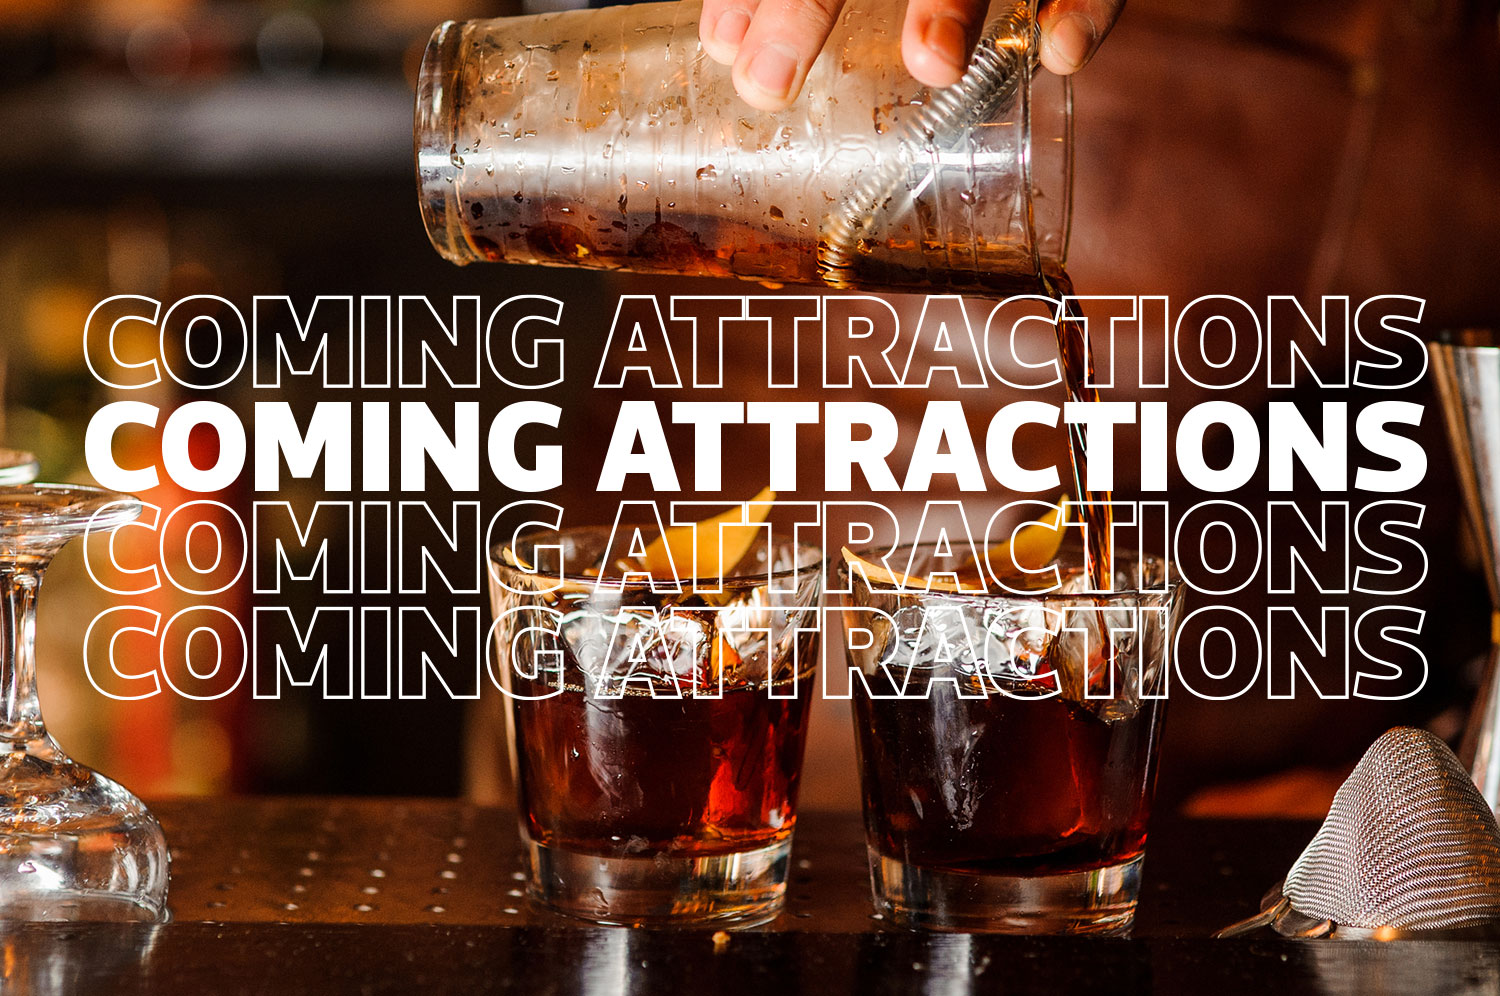 A person’s hand pours a drink out of a copper shaker into a rocks glass. The words “coming attractions” are overlaid in white.